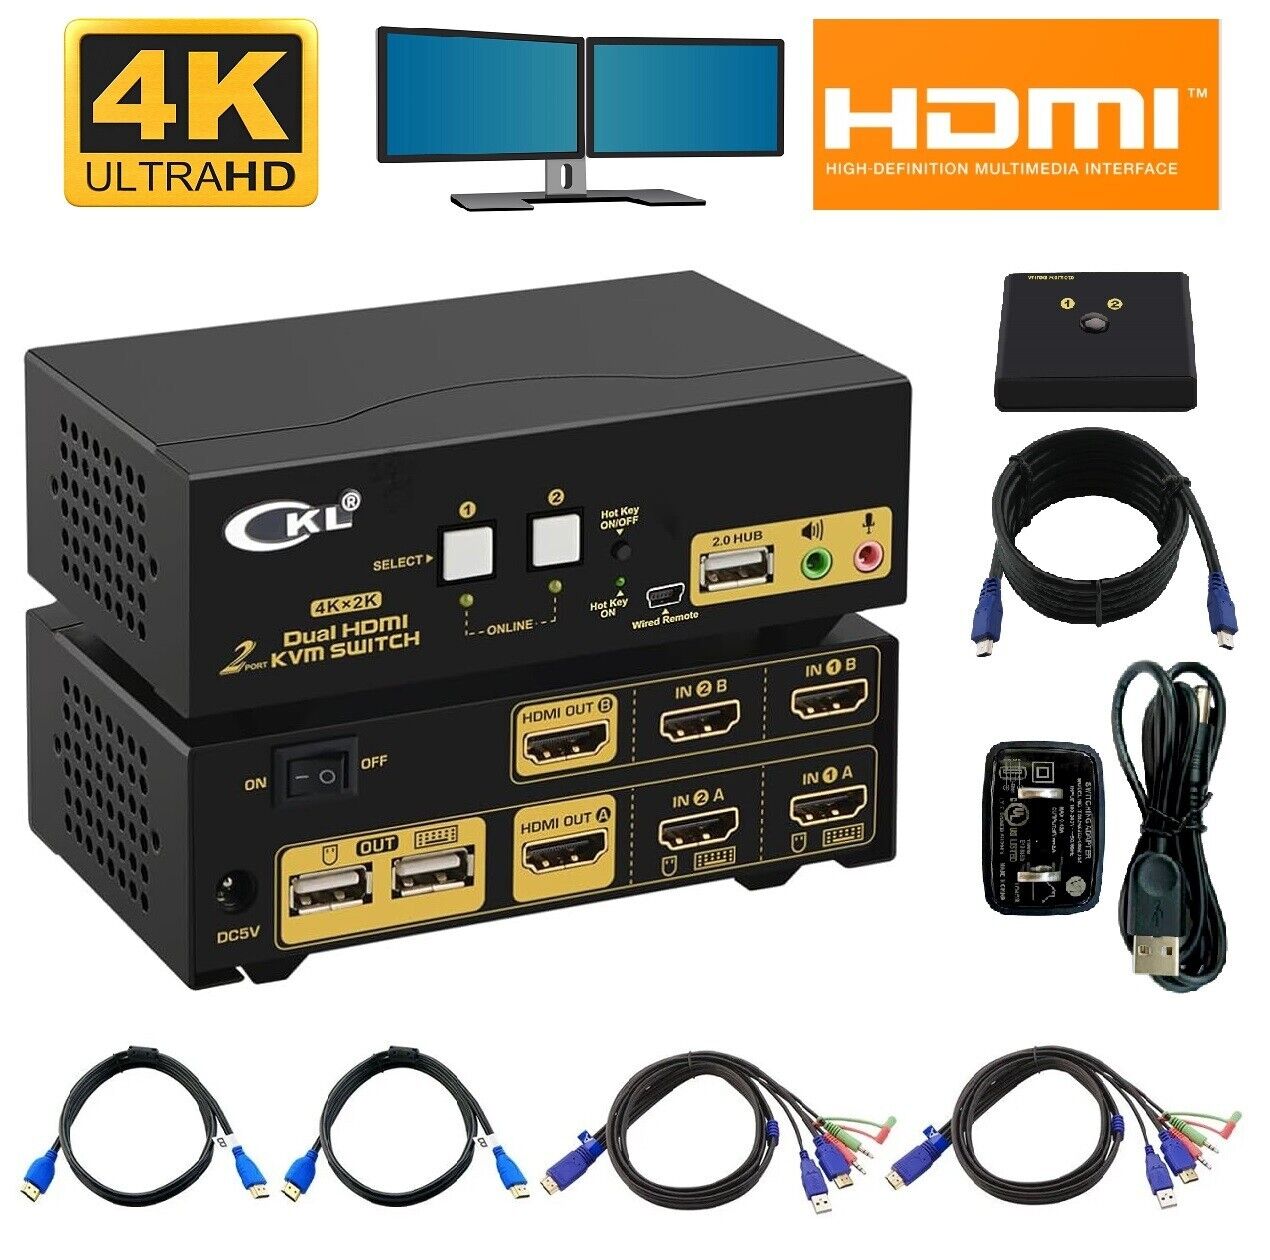 2 Port HDMI KVM Switch 4K Dual Monitor Extended Display W/ USB 2.0/Audio Support